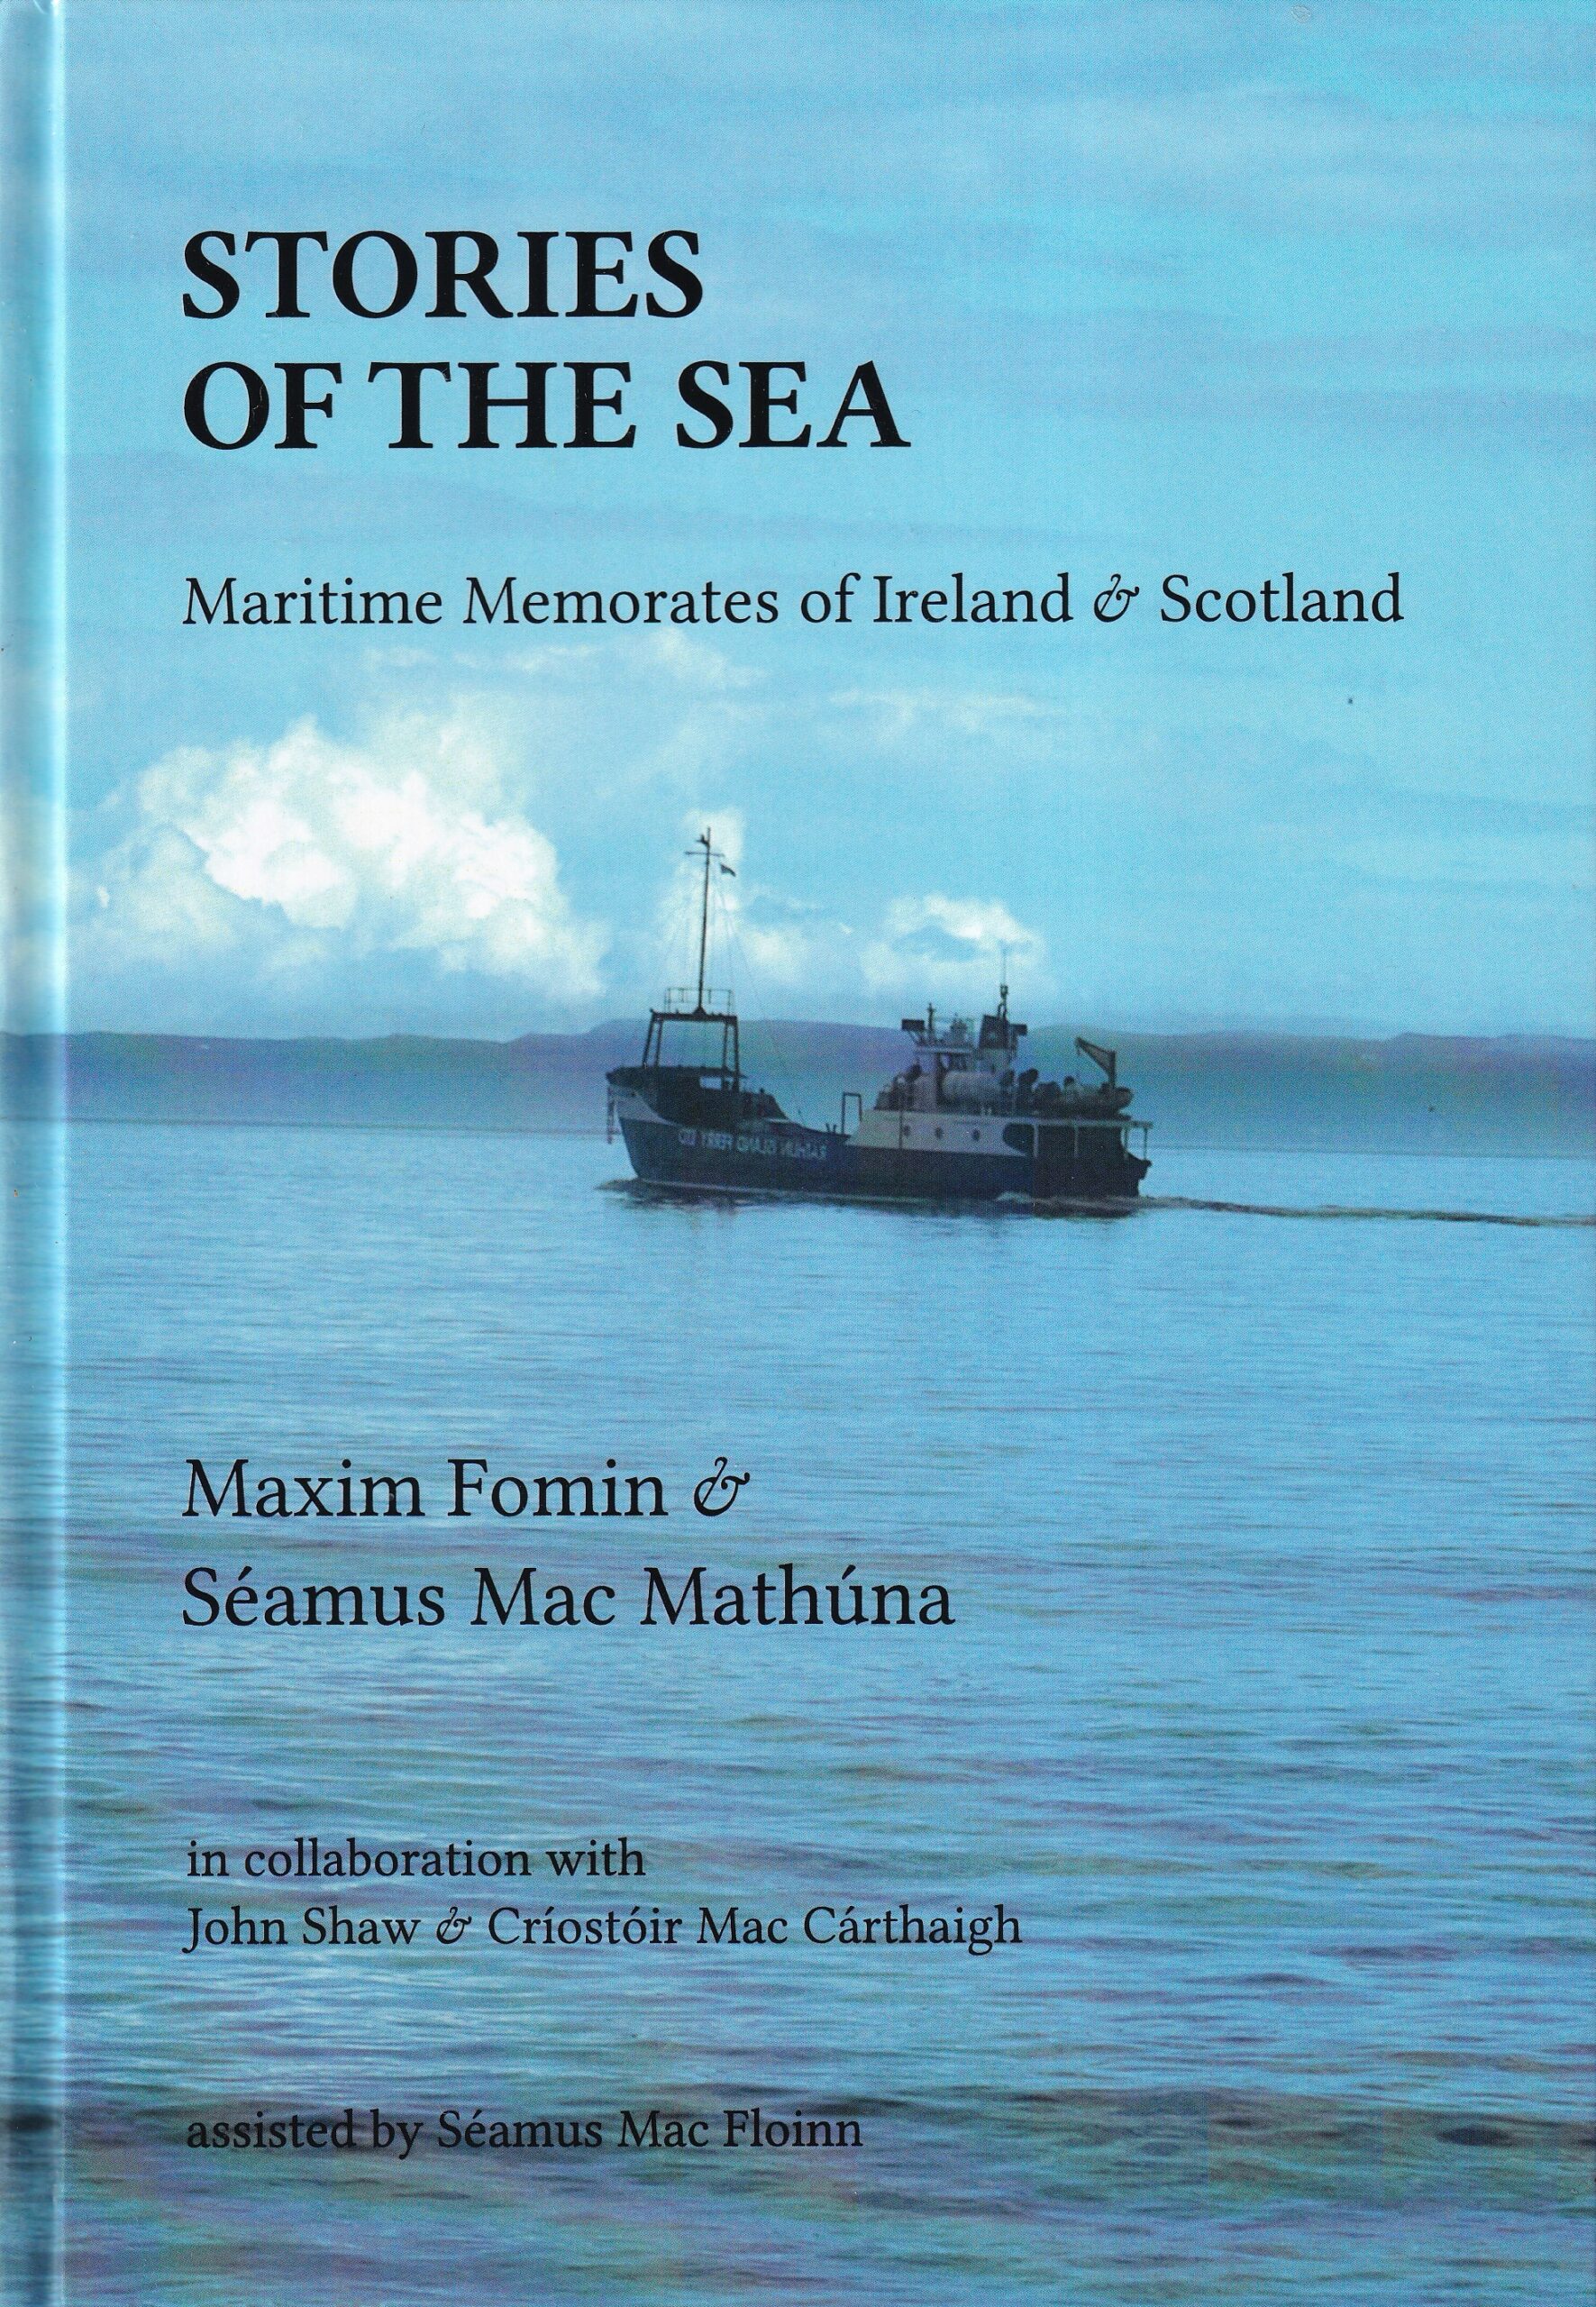 Stories of the Sea: Maritime Memorates of Ireland and Scotland | Maxim Fomin and Séamus Mac Mathúna | Charlie Byrne's